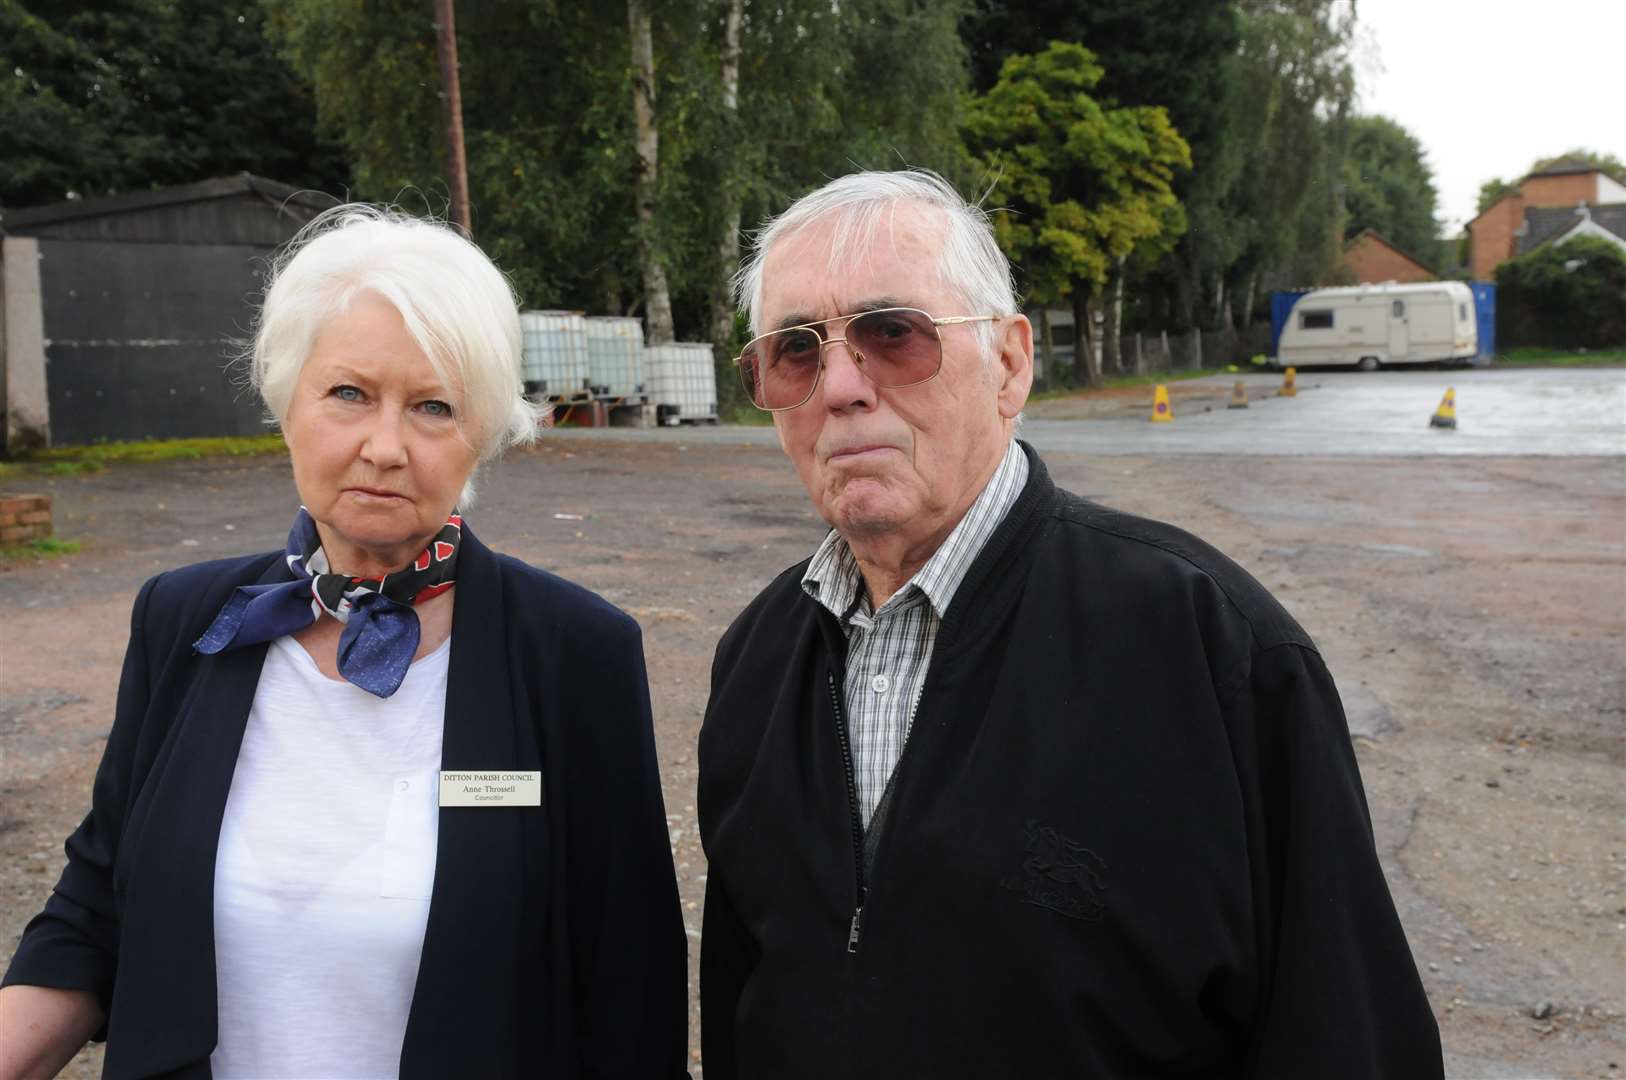 Cllr Anne Throssell and Tony Mulcuck were among those against the plans. Picture: Steve Crispe